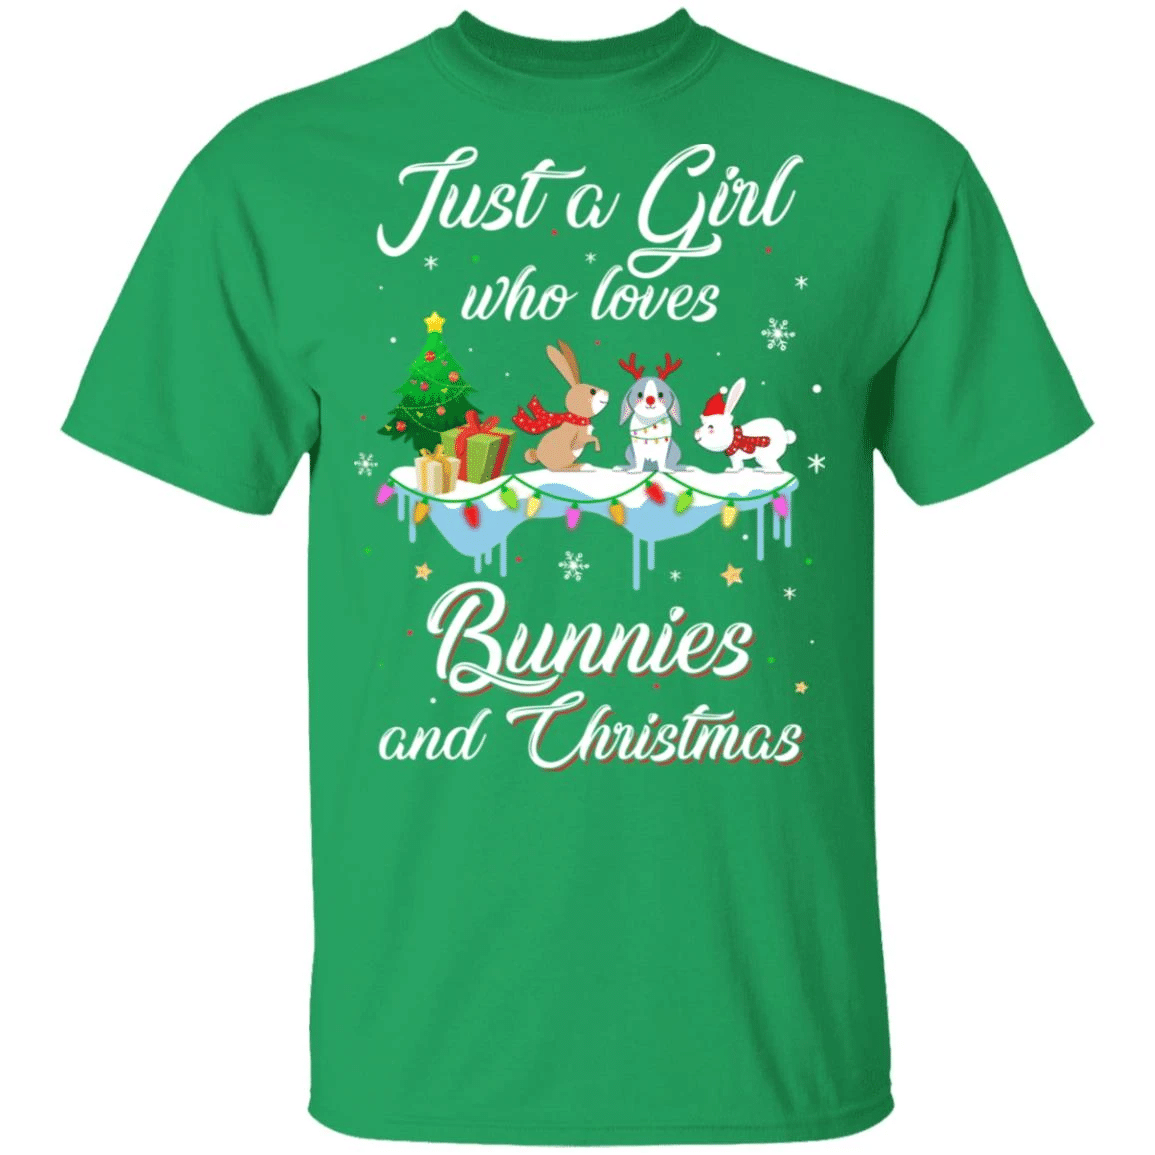 Just A Girl Who Loves Bunnies And Christmas Gift Christmas Tree T-Shirt Sweatshirt Style: Unisex T-shirt, Color: Green